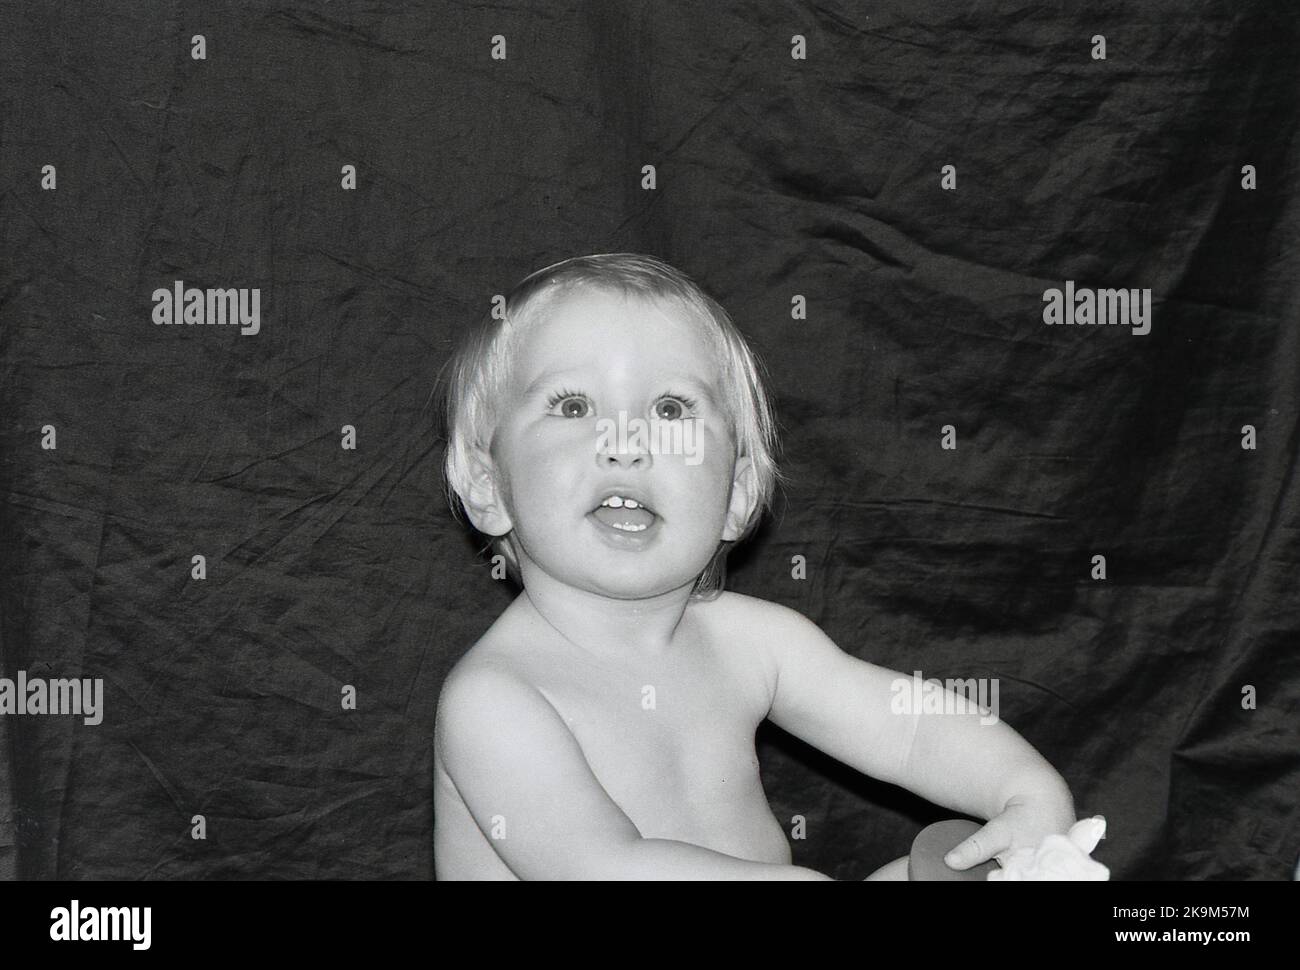 Portrait of a one year old baby boy against a dark background. Stock Photo